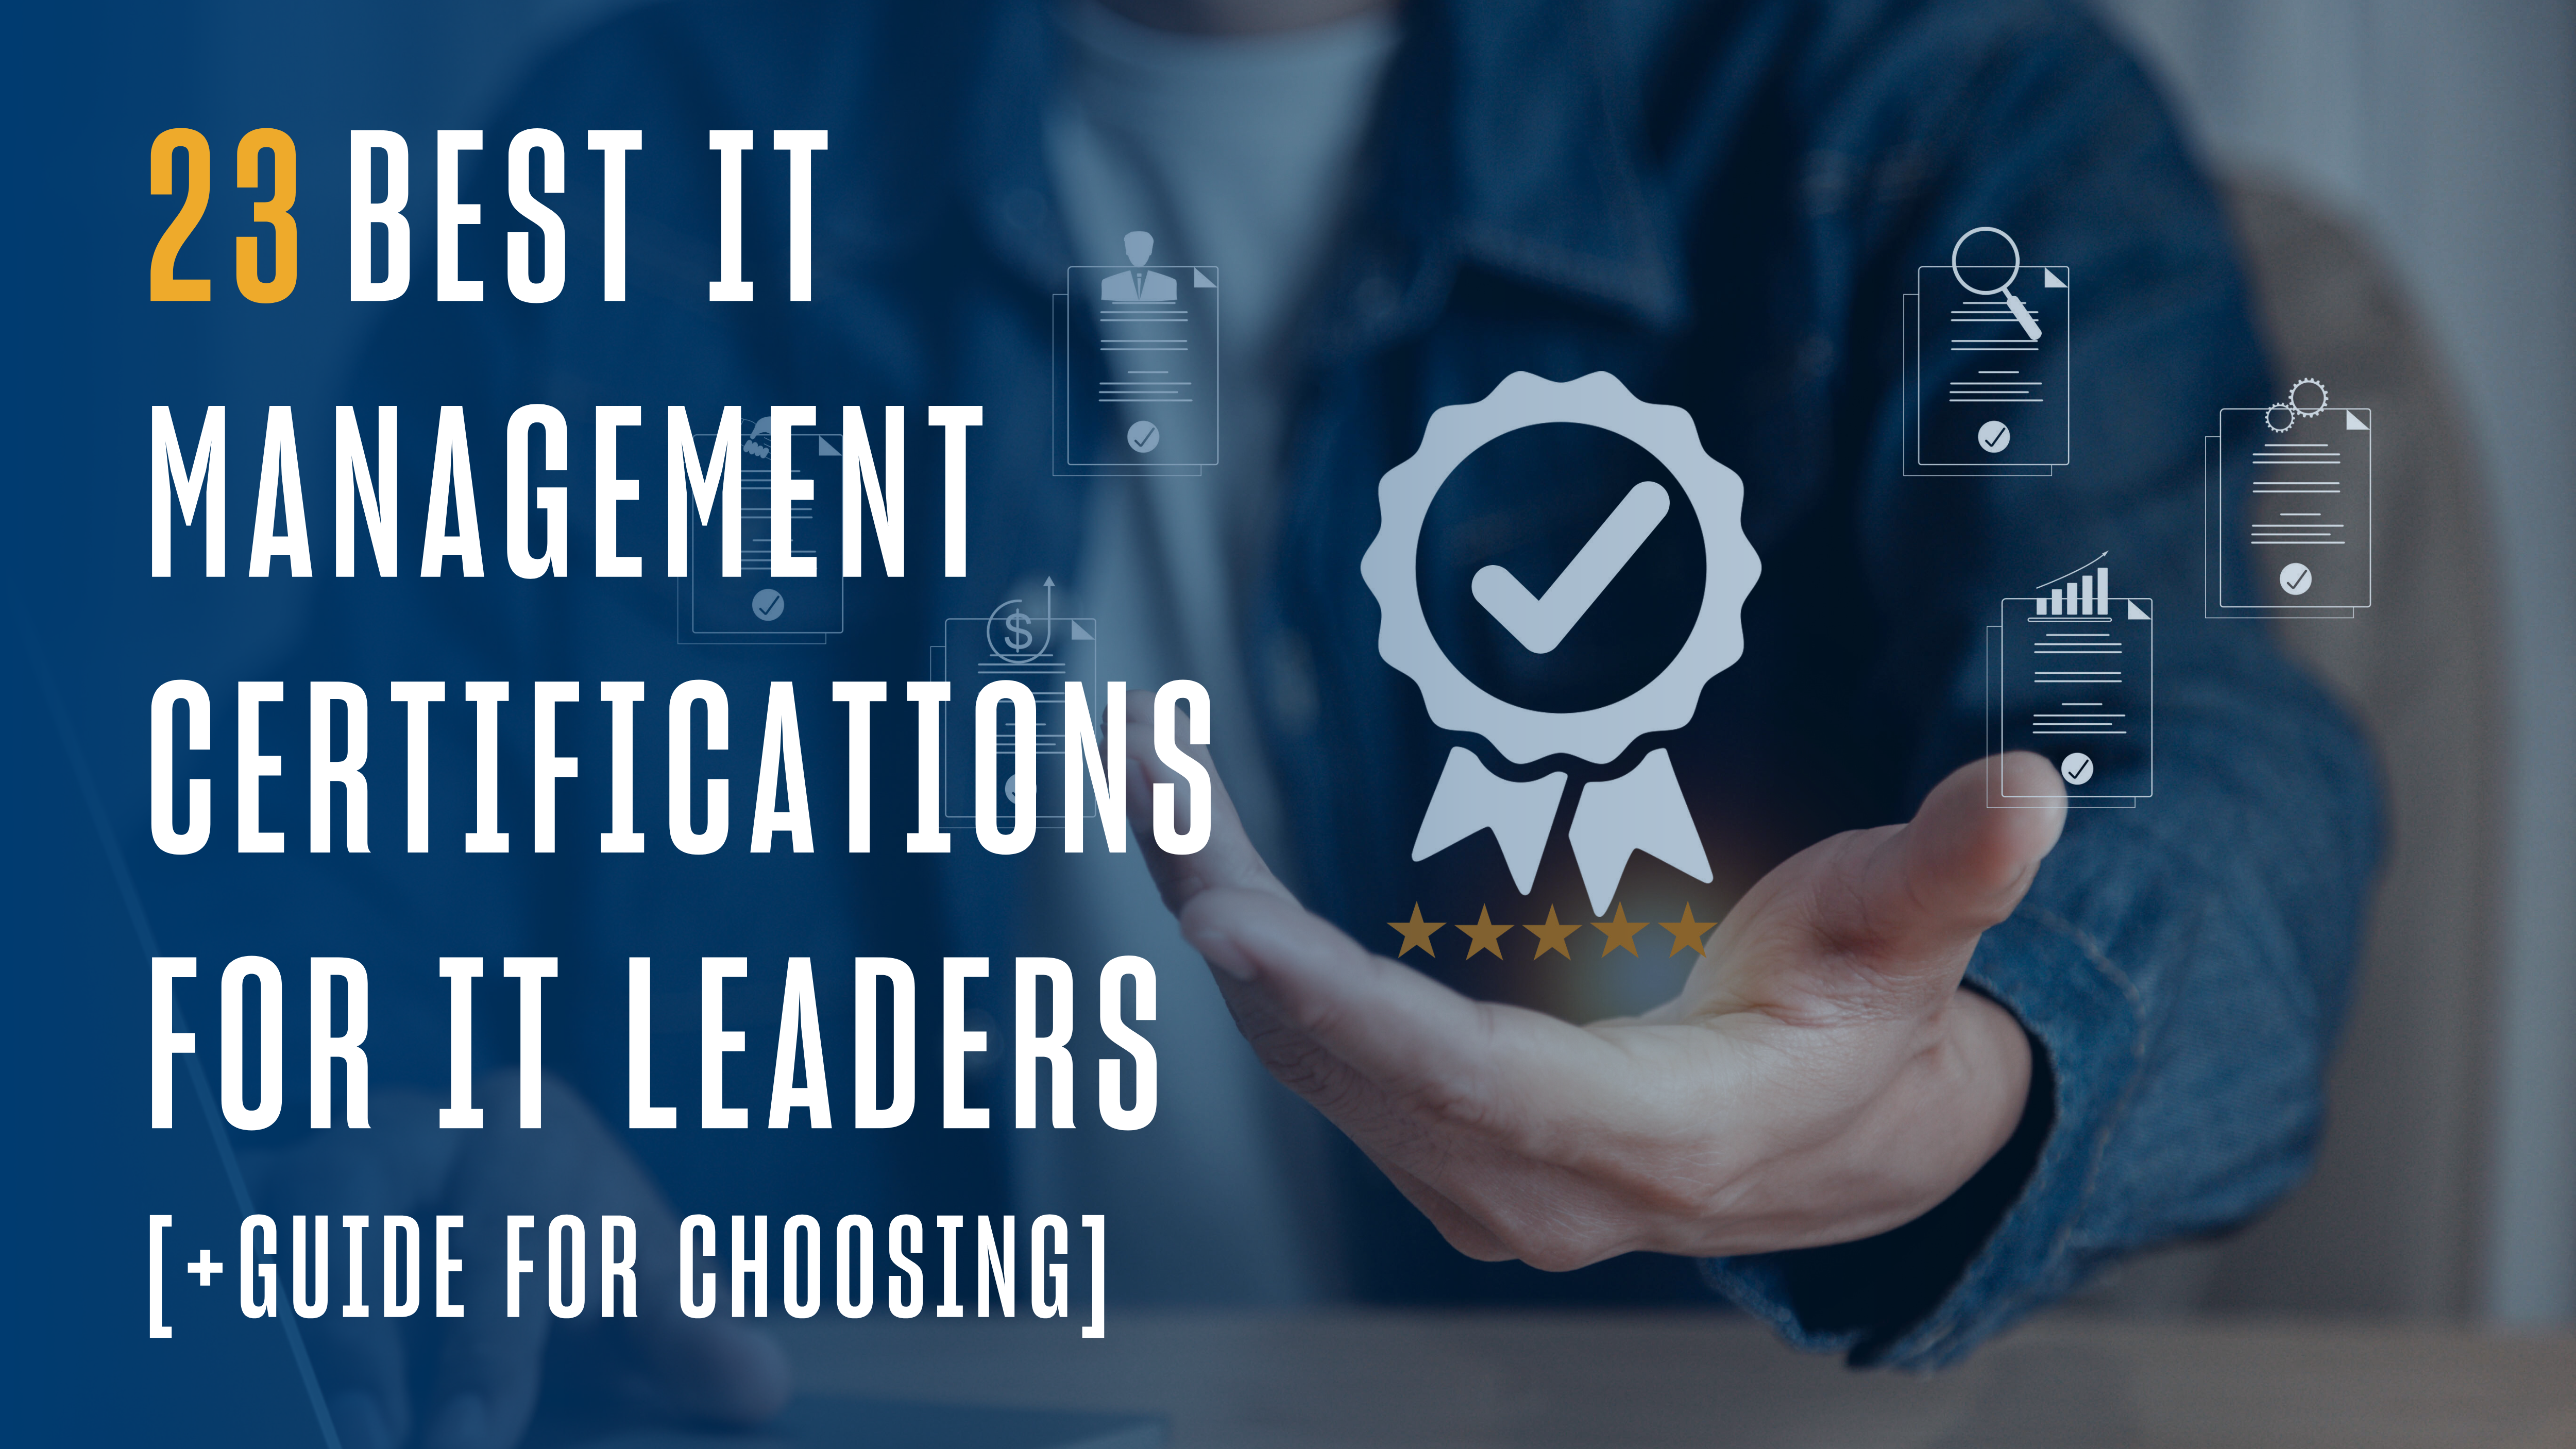 23 Best IT Management Certifications for IT Leaders [+Guide for Choosing]